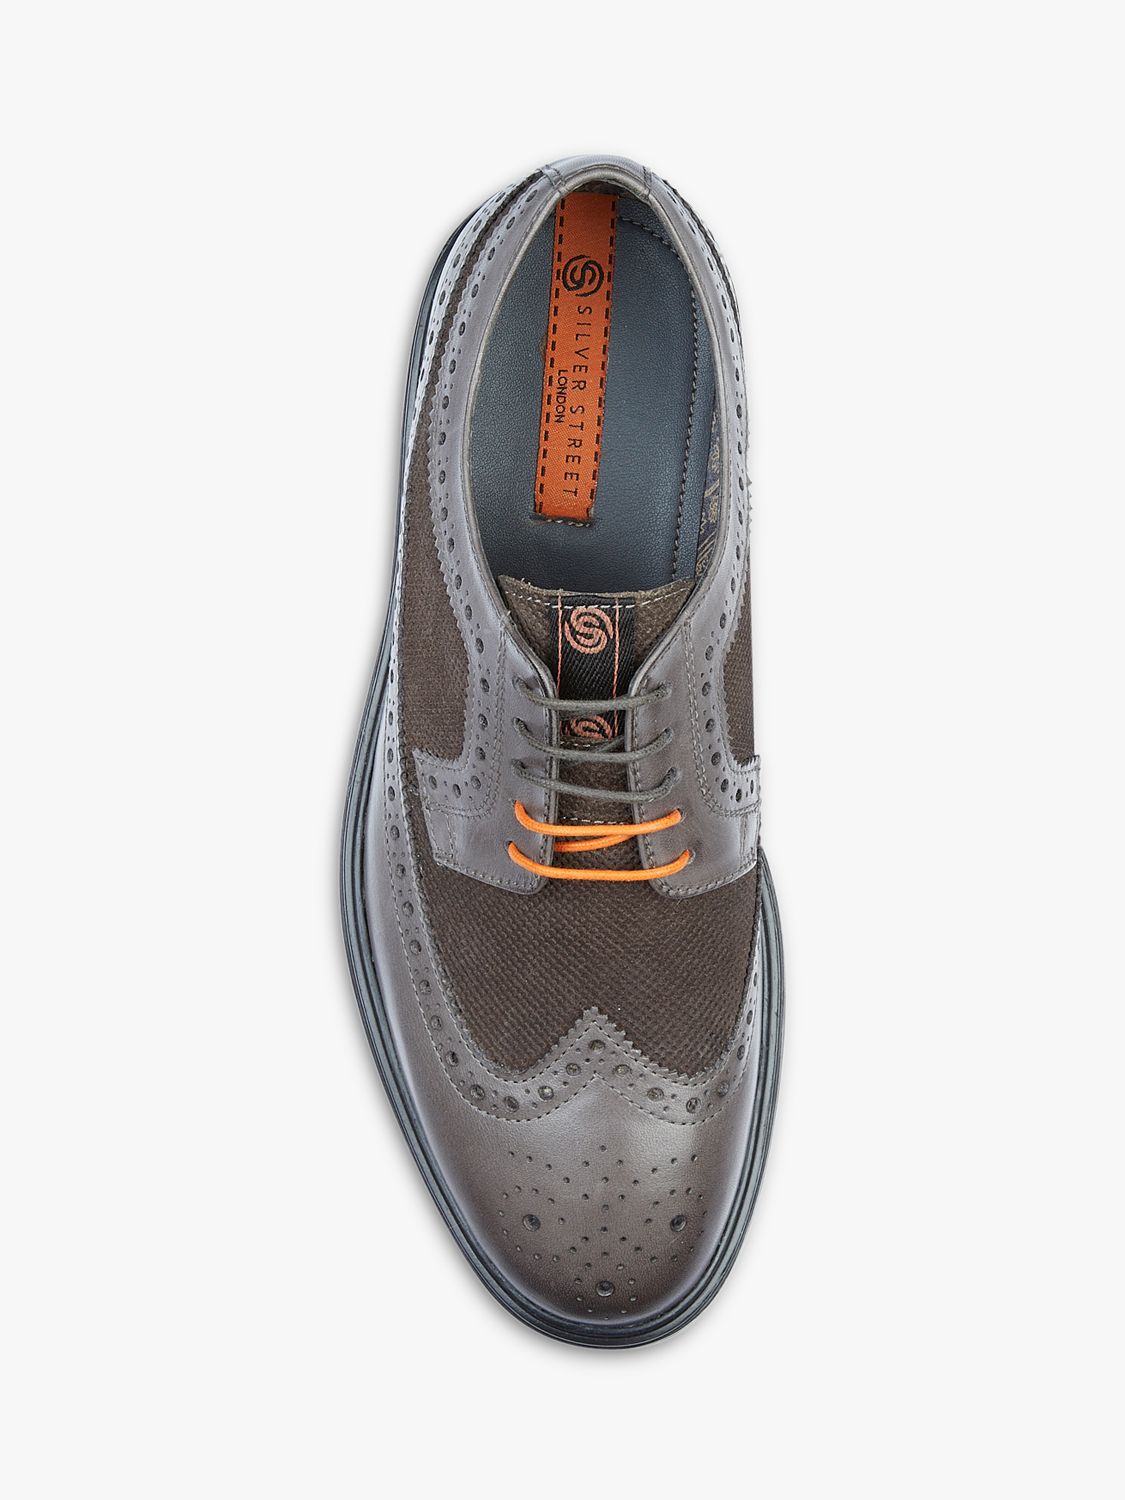 Buy Silver Street London Soho Leather Brogues Online at johnlewis.com